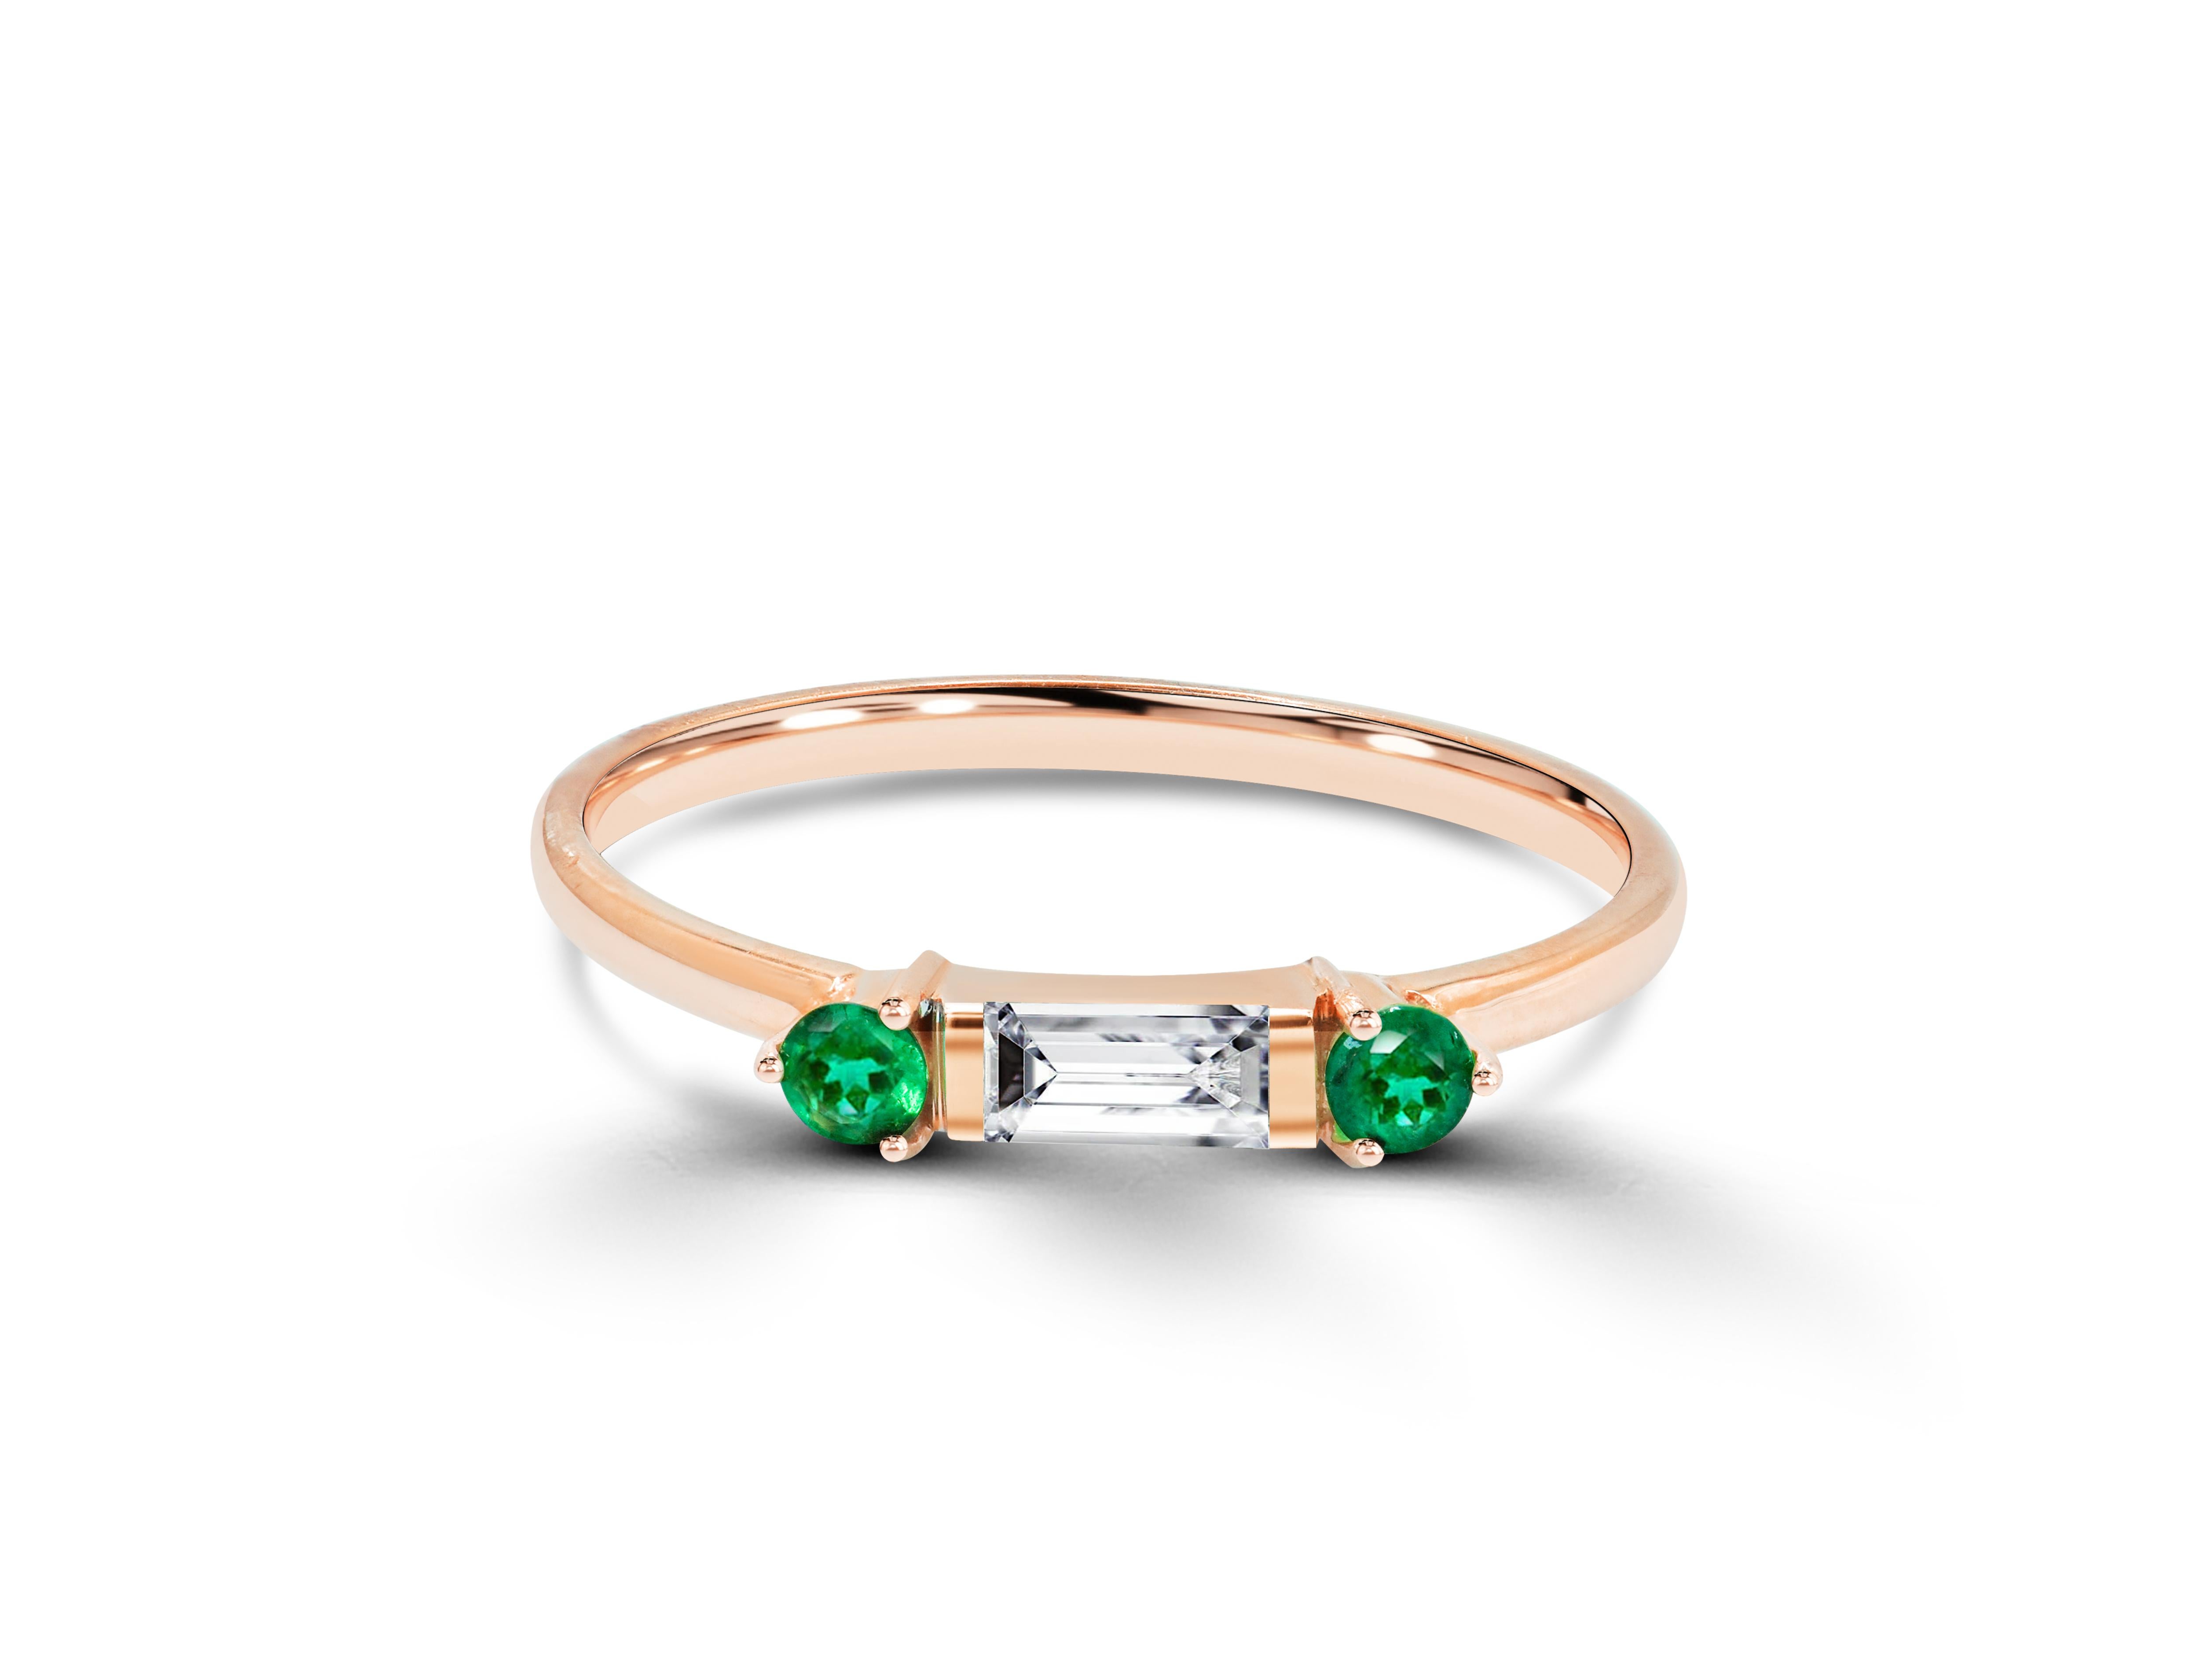 For Sale:  14k Gold Dainty Baguette Diamond Ring with Emerald Minimal Ring 2